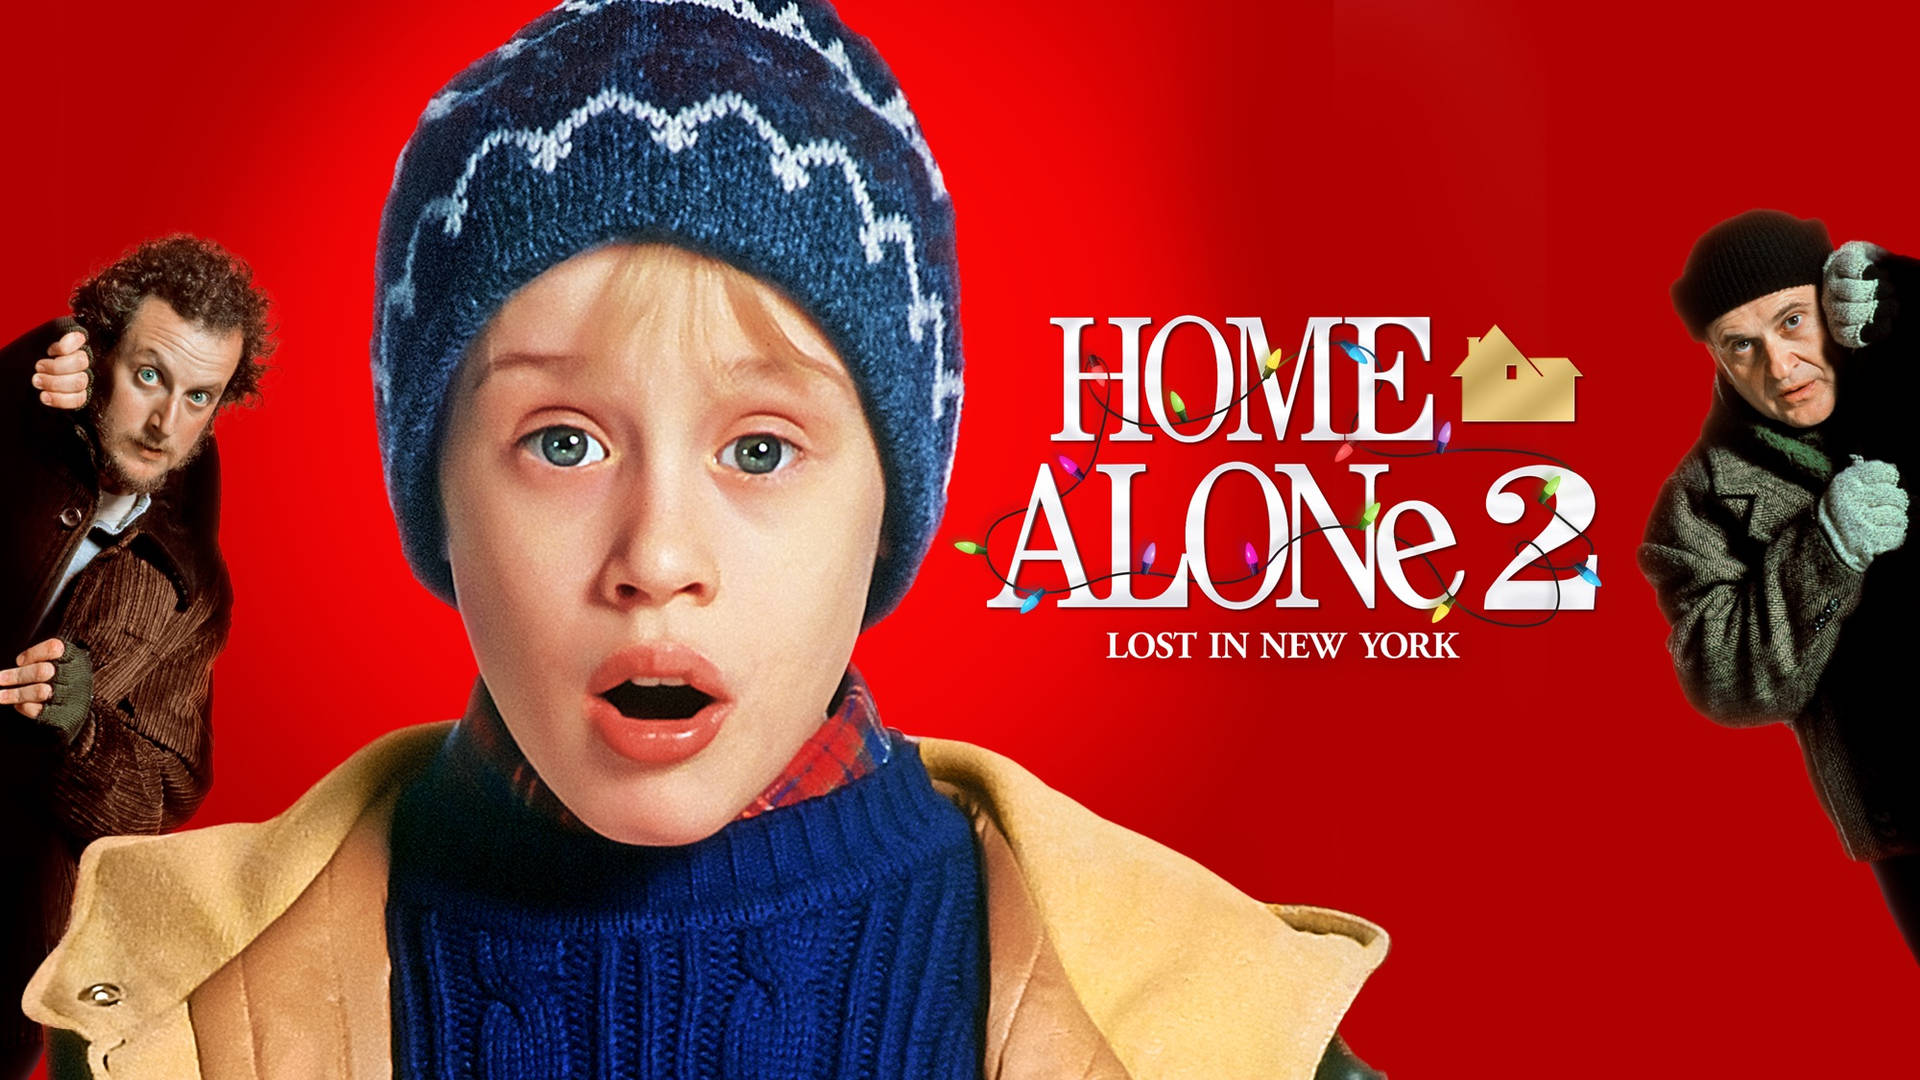 home alone 2 movie poster